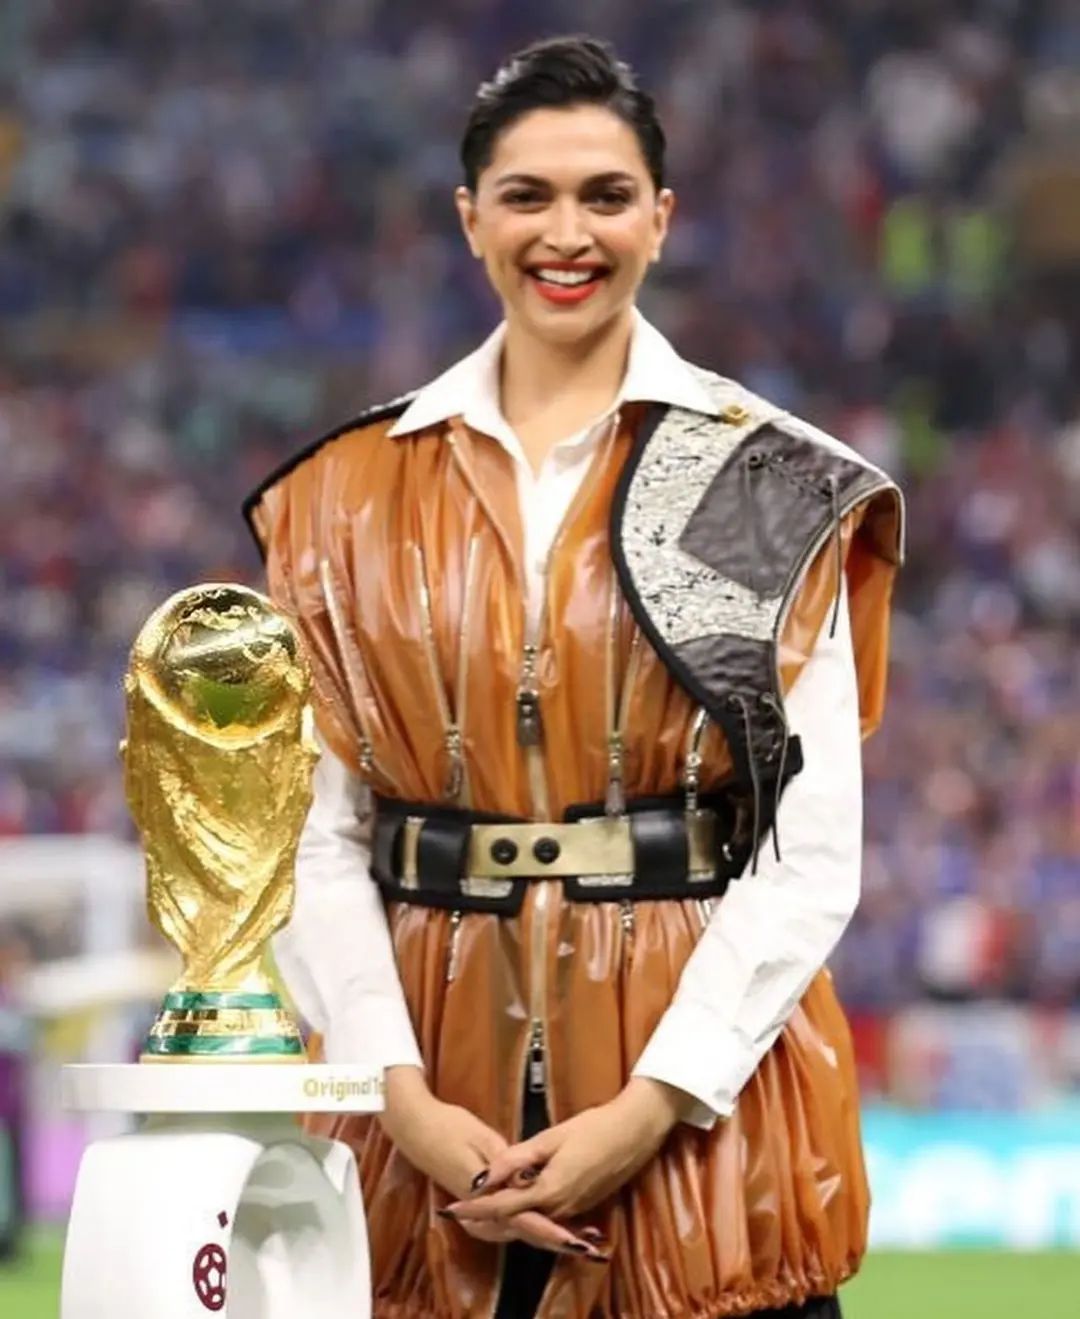 Deepika Padukone unveils the FIFA World Cup trophy at the stadium